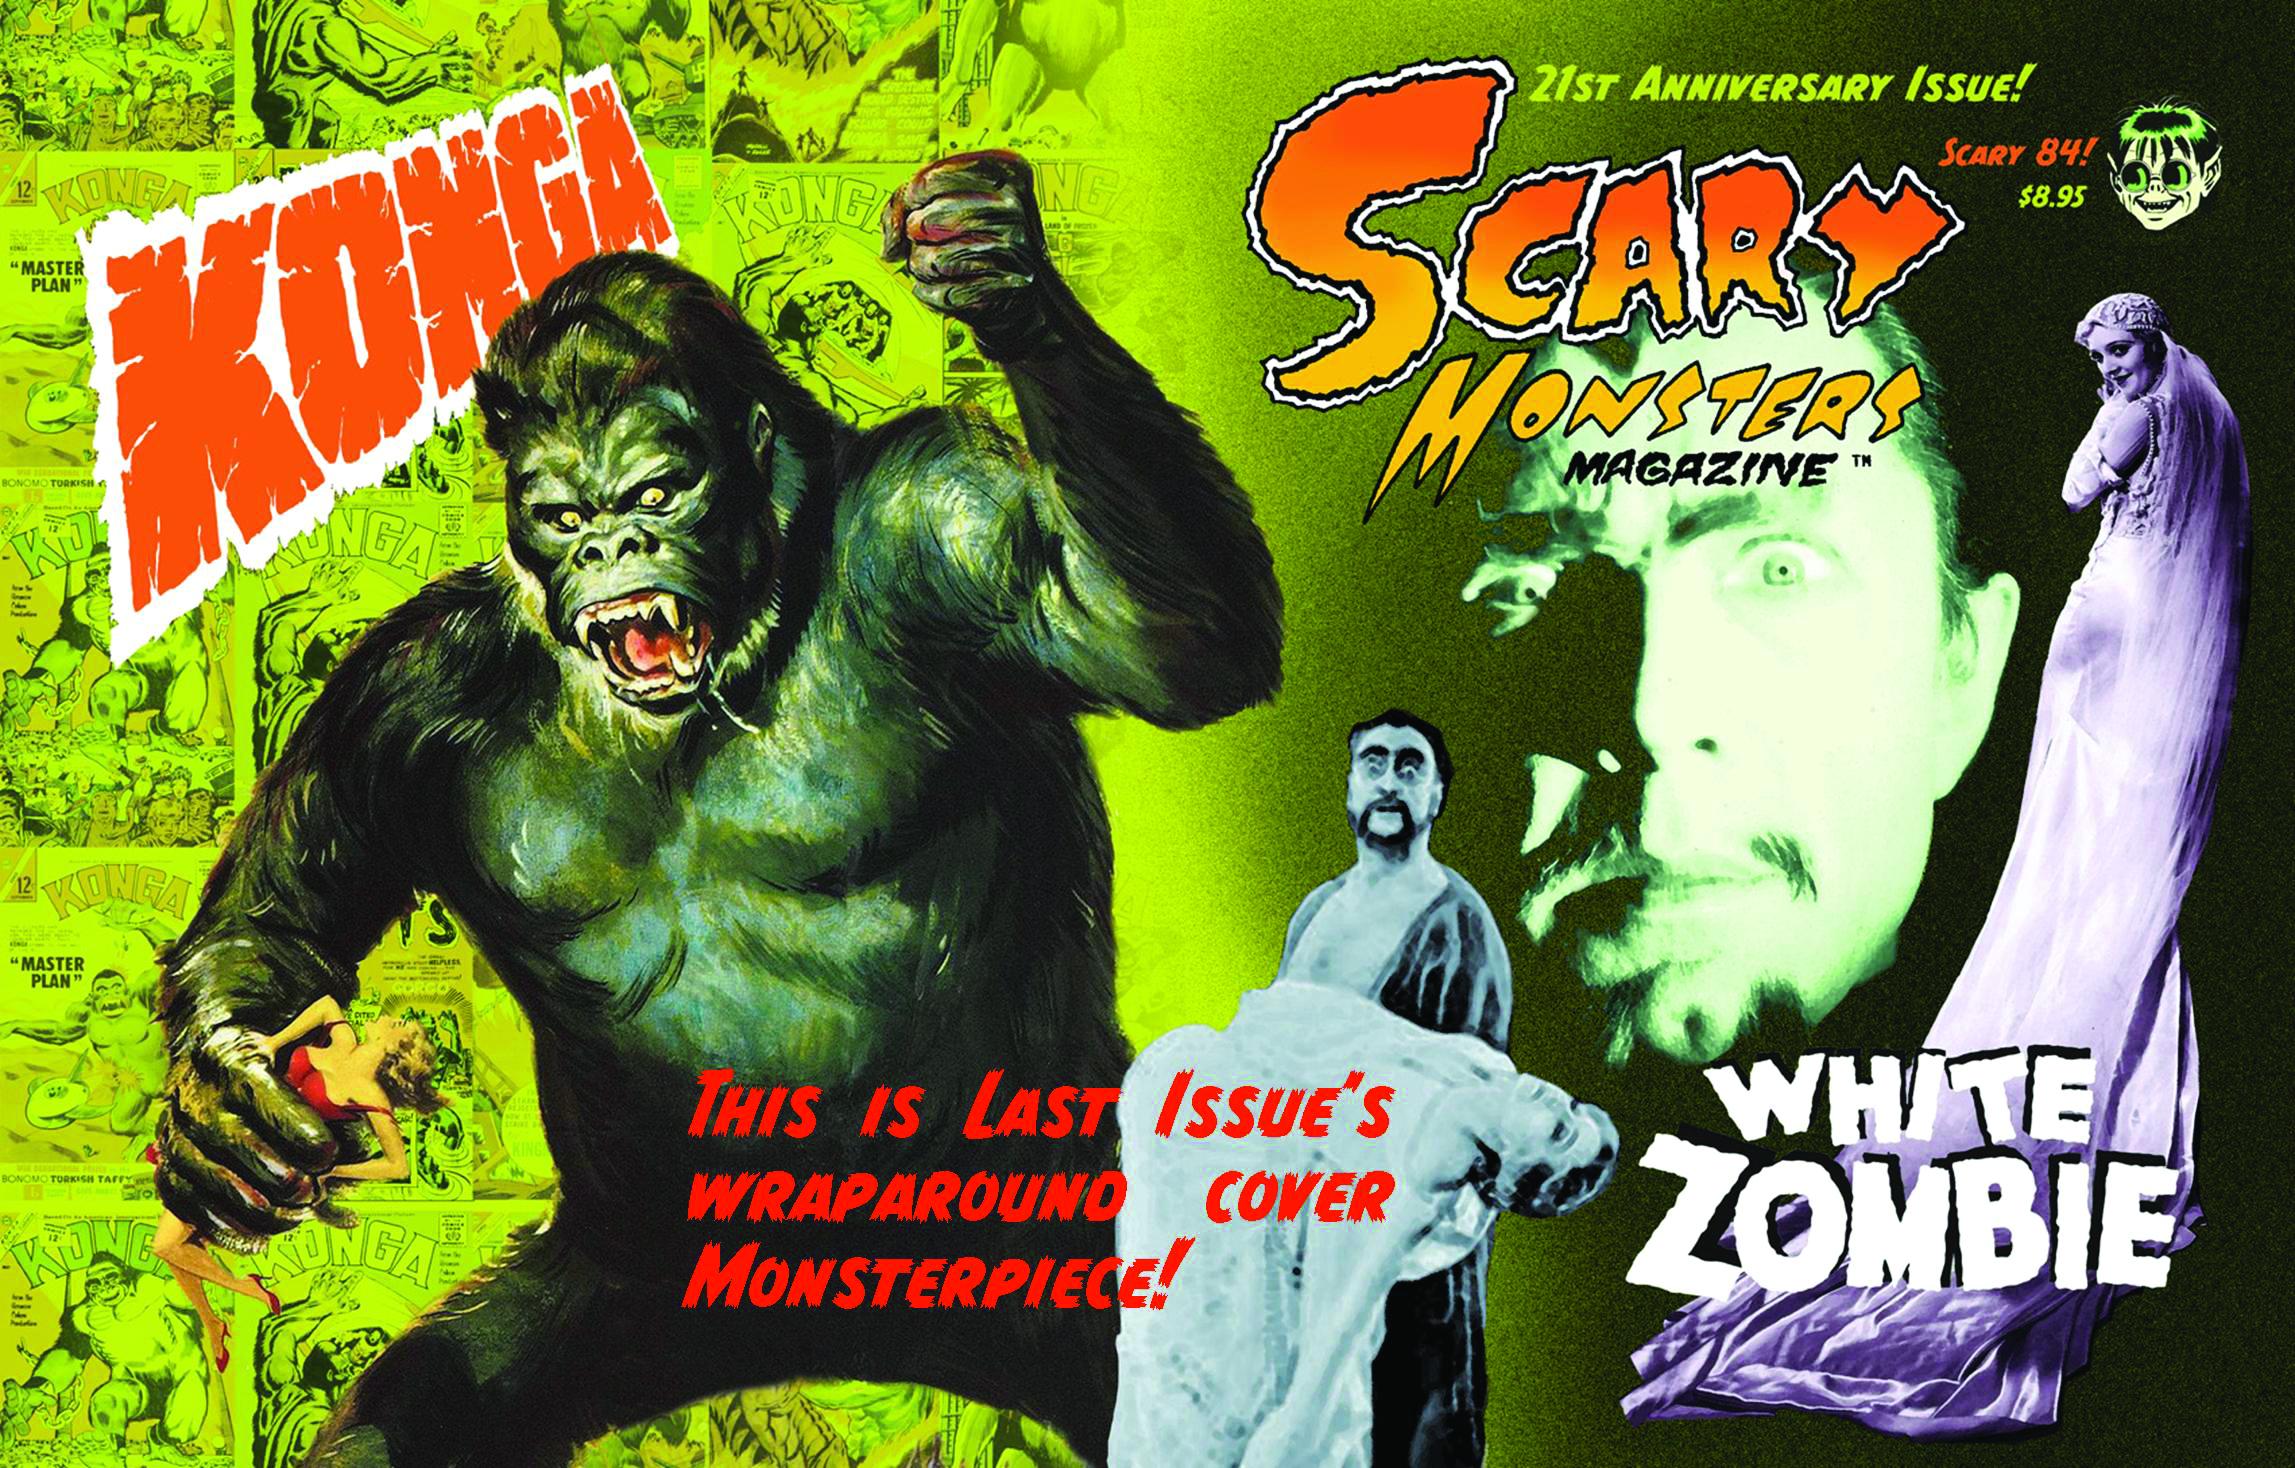 SCARY MONSTERS MAGAZINE #85